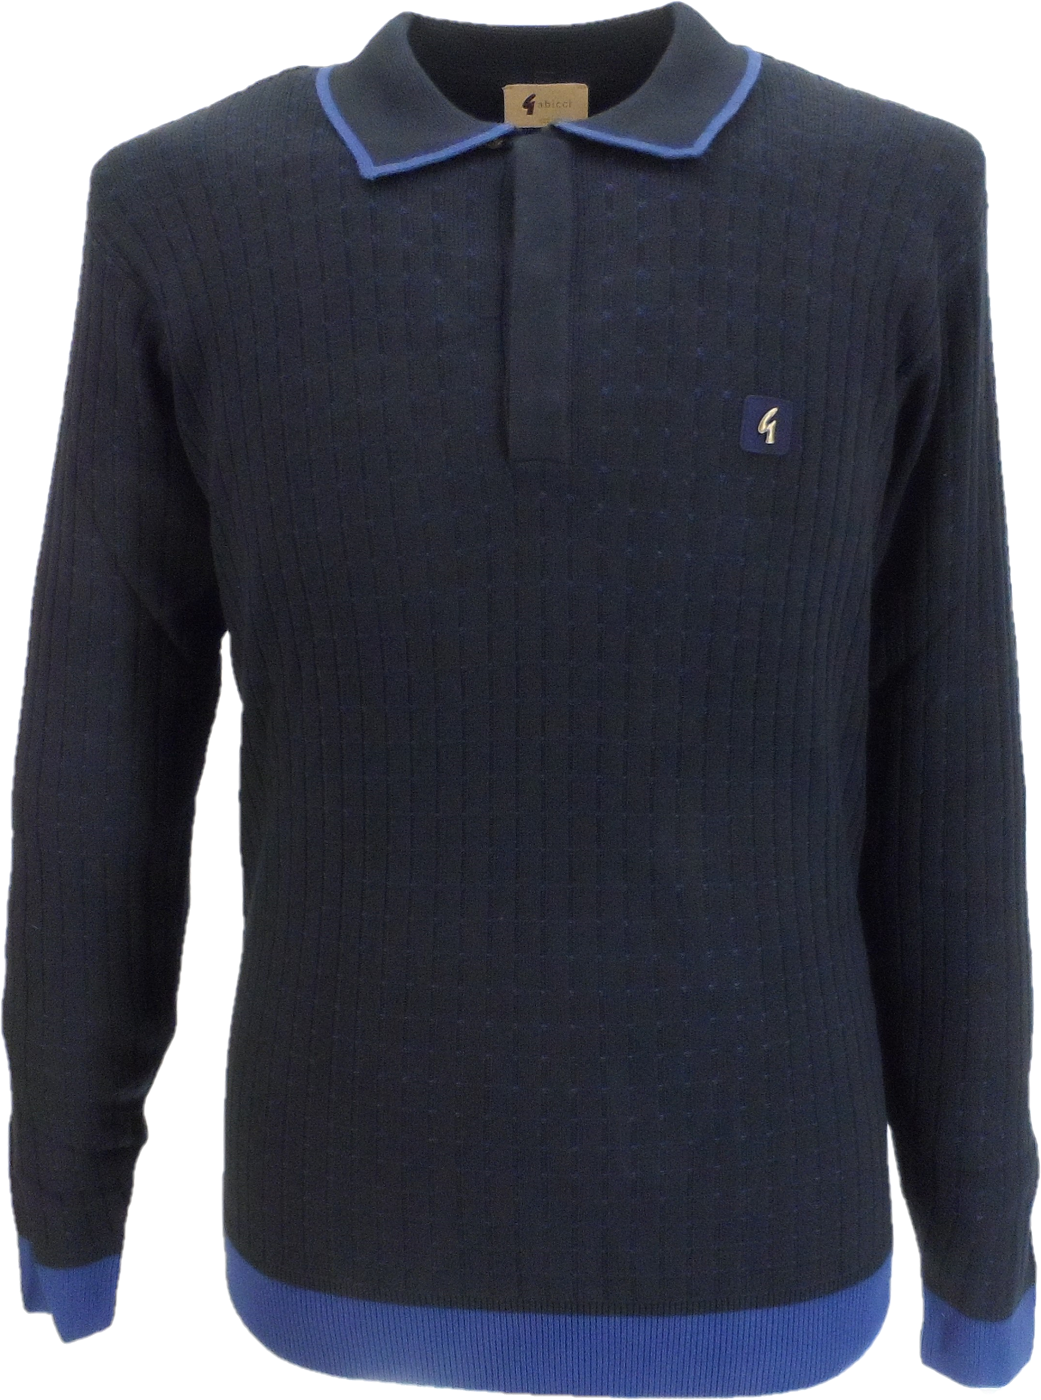 Gabicci Mens Navy Blue Textured Retro Knitted Polo